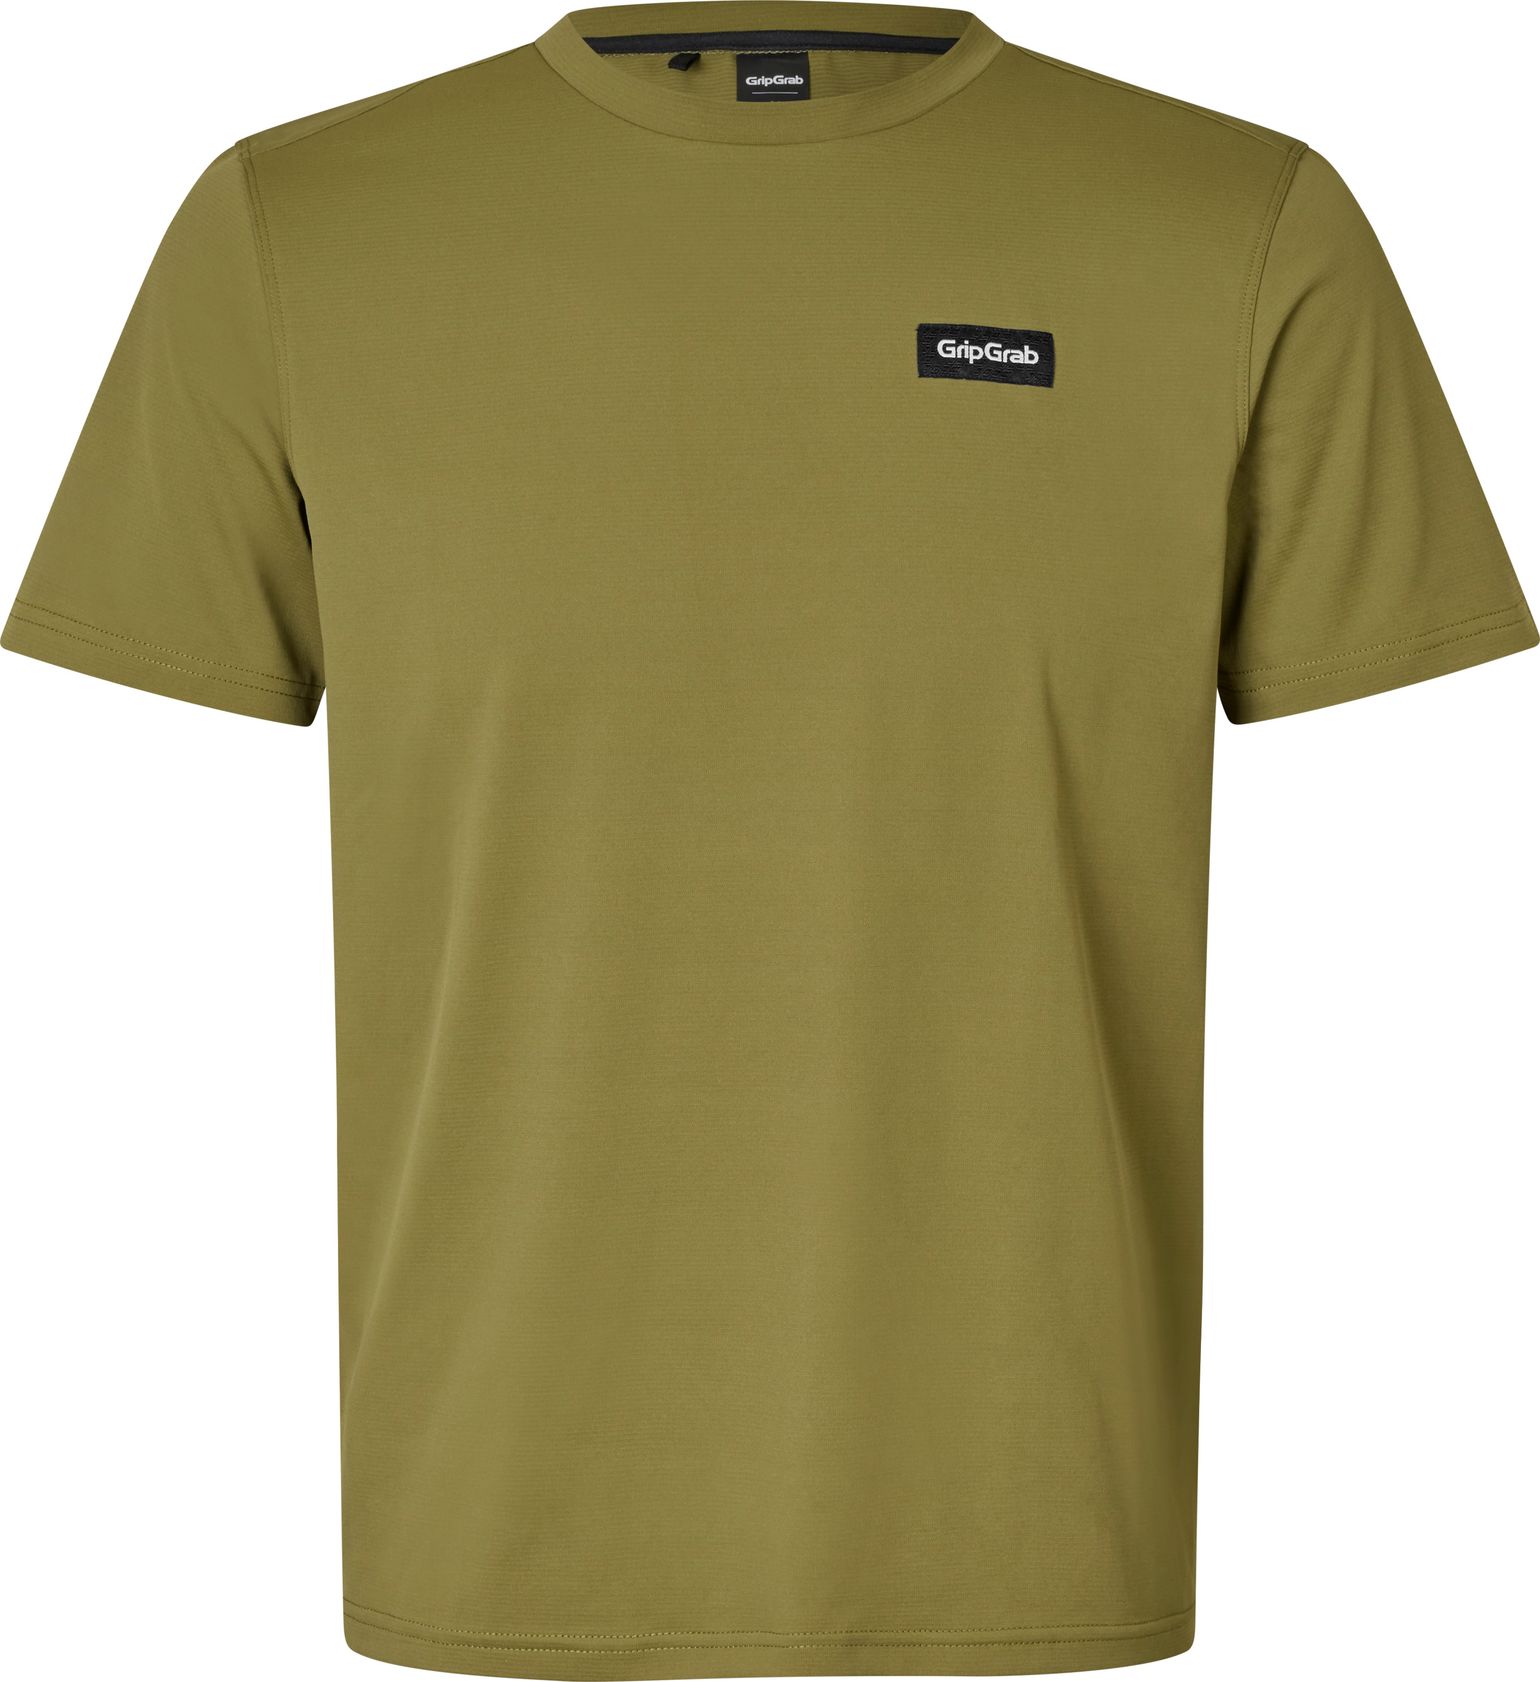 Gripgrab Men's Flow Technical T-Shirt Olive Green